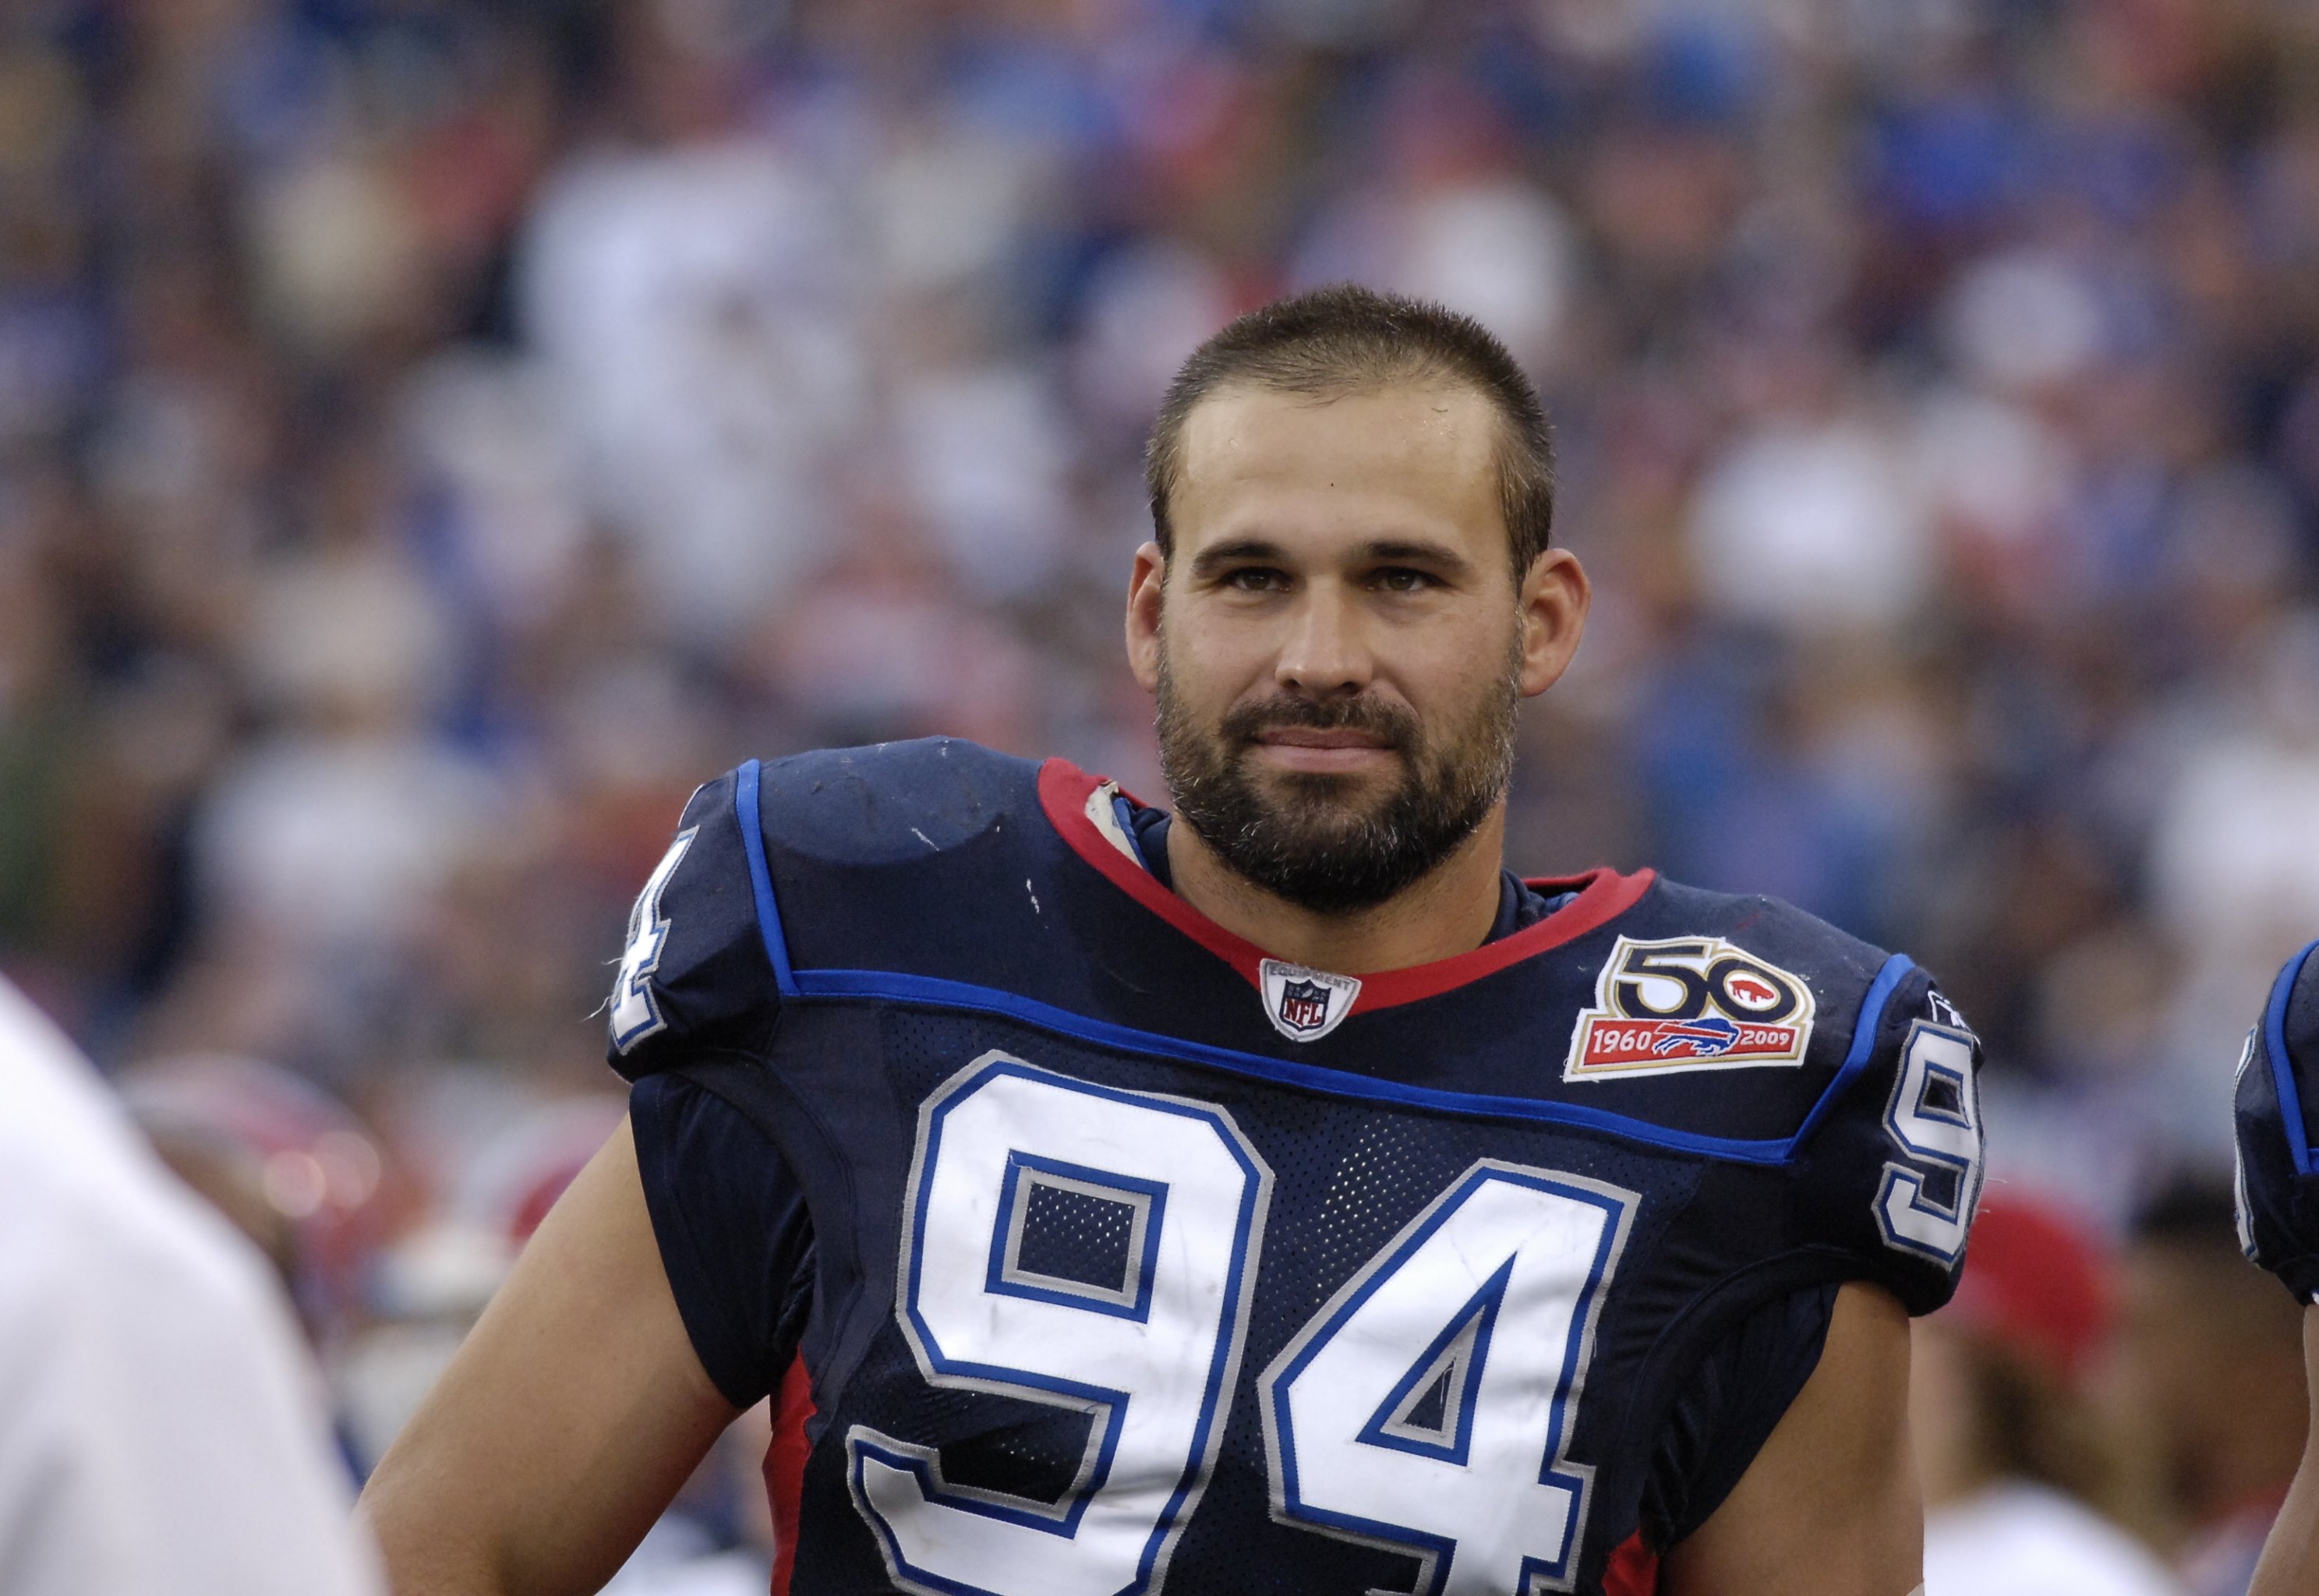 The 30 best NFL players in their 30s